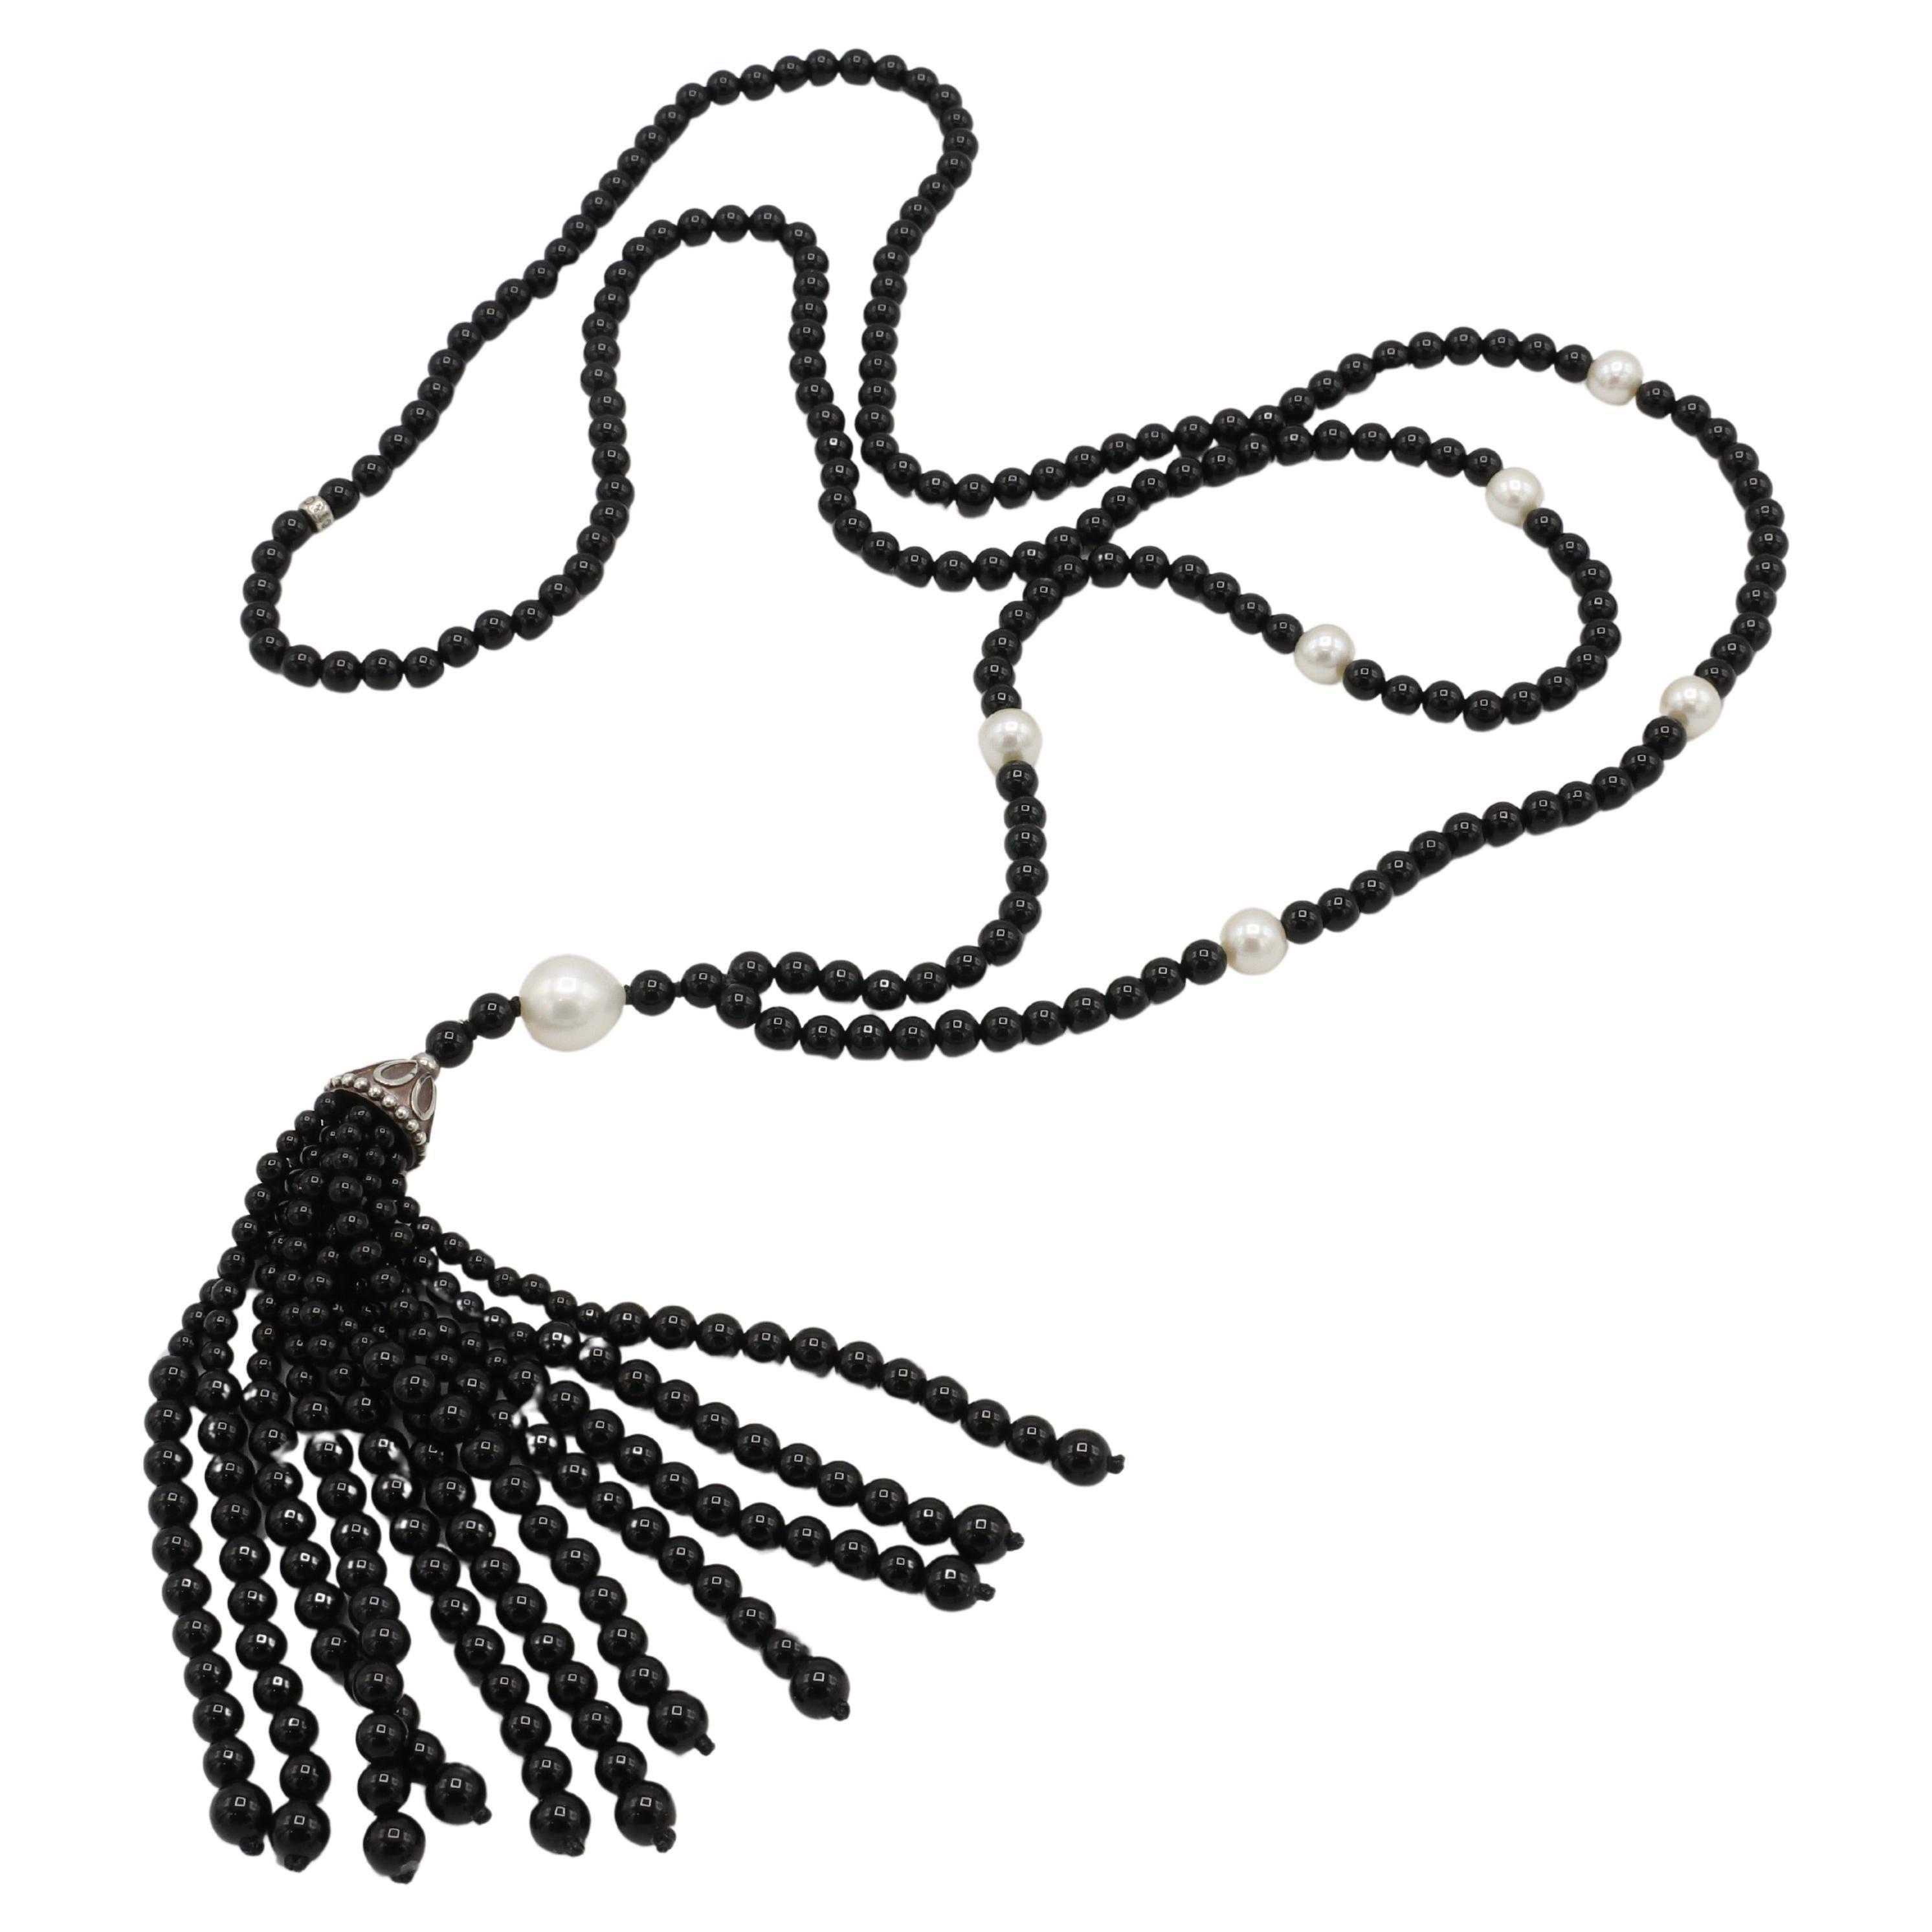 Tiffany & Co Blake Onyx & Pearl Tassel Pendant Drop Necklace
Metal: Sterling silver 
Weight: 42.7 grams
Onyx: 2.5 - 4.5mm beads
Pearls: 6-9mm
Drop: 4.5 inches
Length: 35 inches
Signed: ©T&Co. AG925
